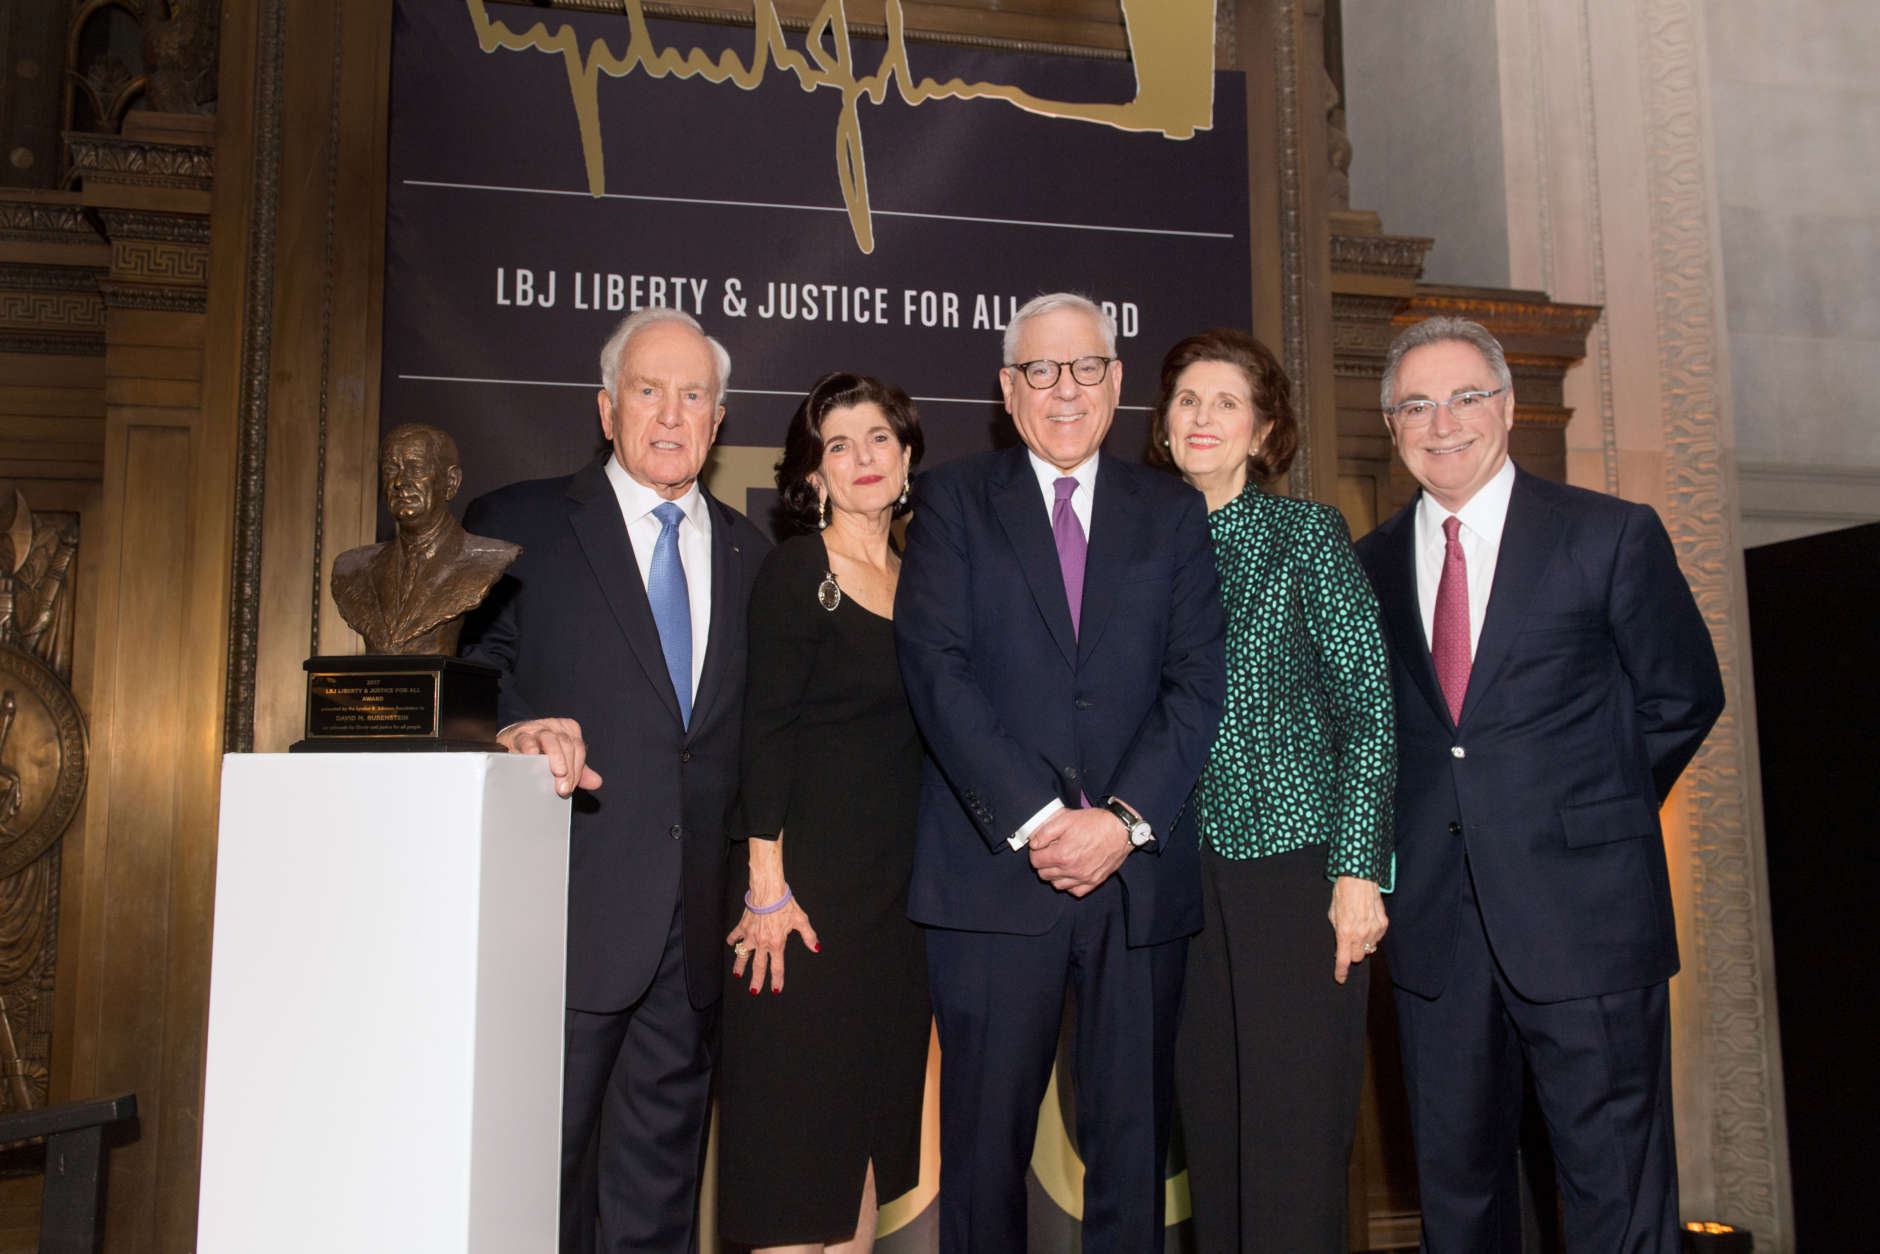 Ambassador Lloyd Hand, Luci Baines Johnson, David Rubenstein, Lynda Johnson Robb and Cappy McGarr at the LBJ Liberty & Justice for All Award ceremony at the National Archives Museum Wednesday. (Courtesy Daniel Swartz)